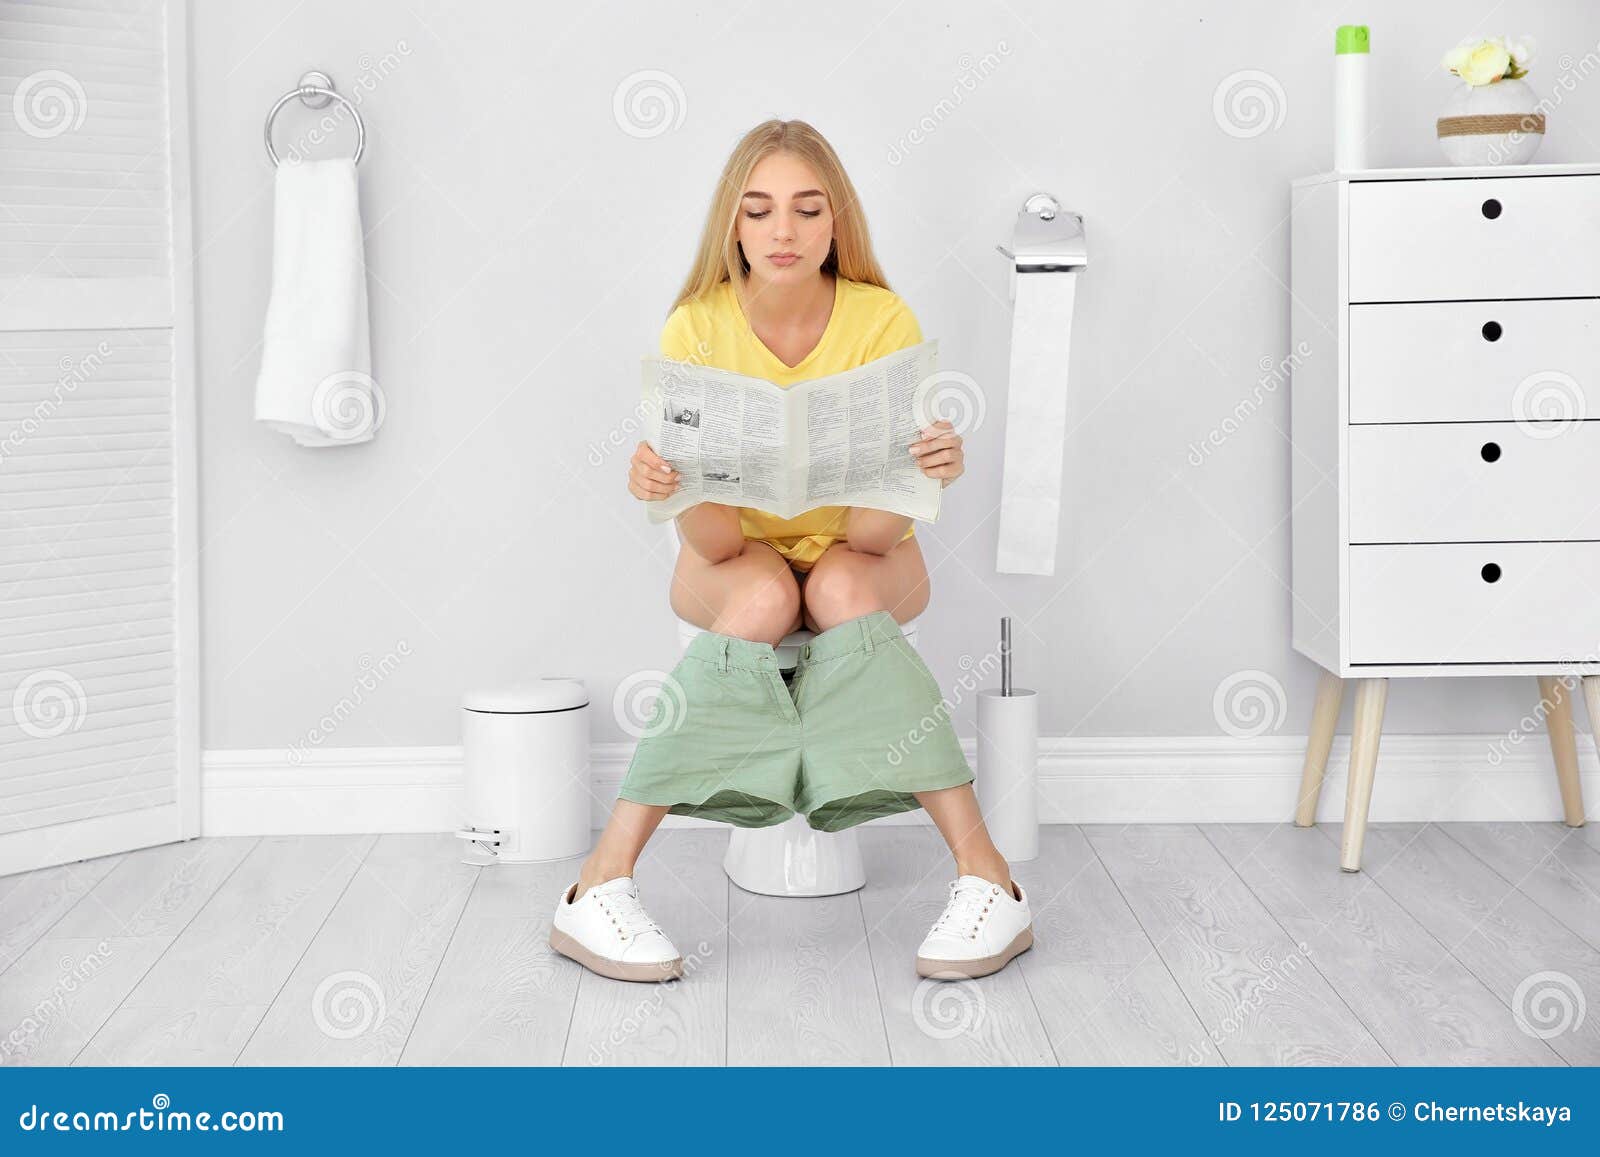 Young Woman Reading Newspaper While Sitting On Toilet Stock Photo - Image o...